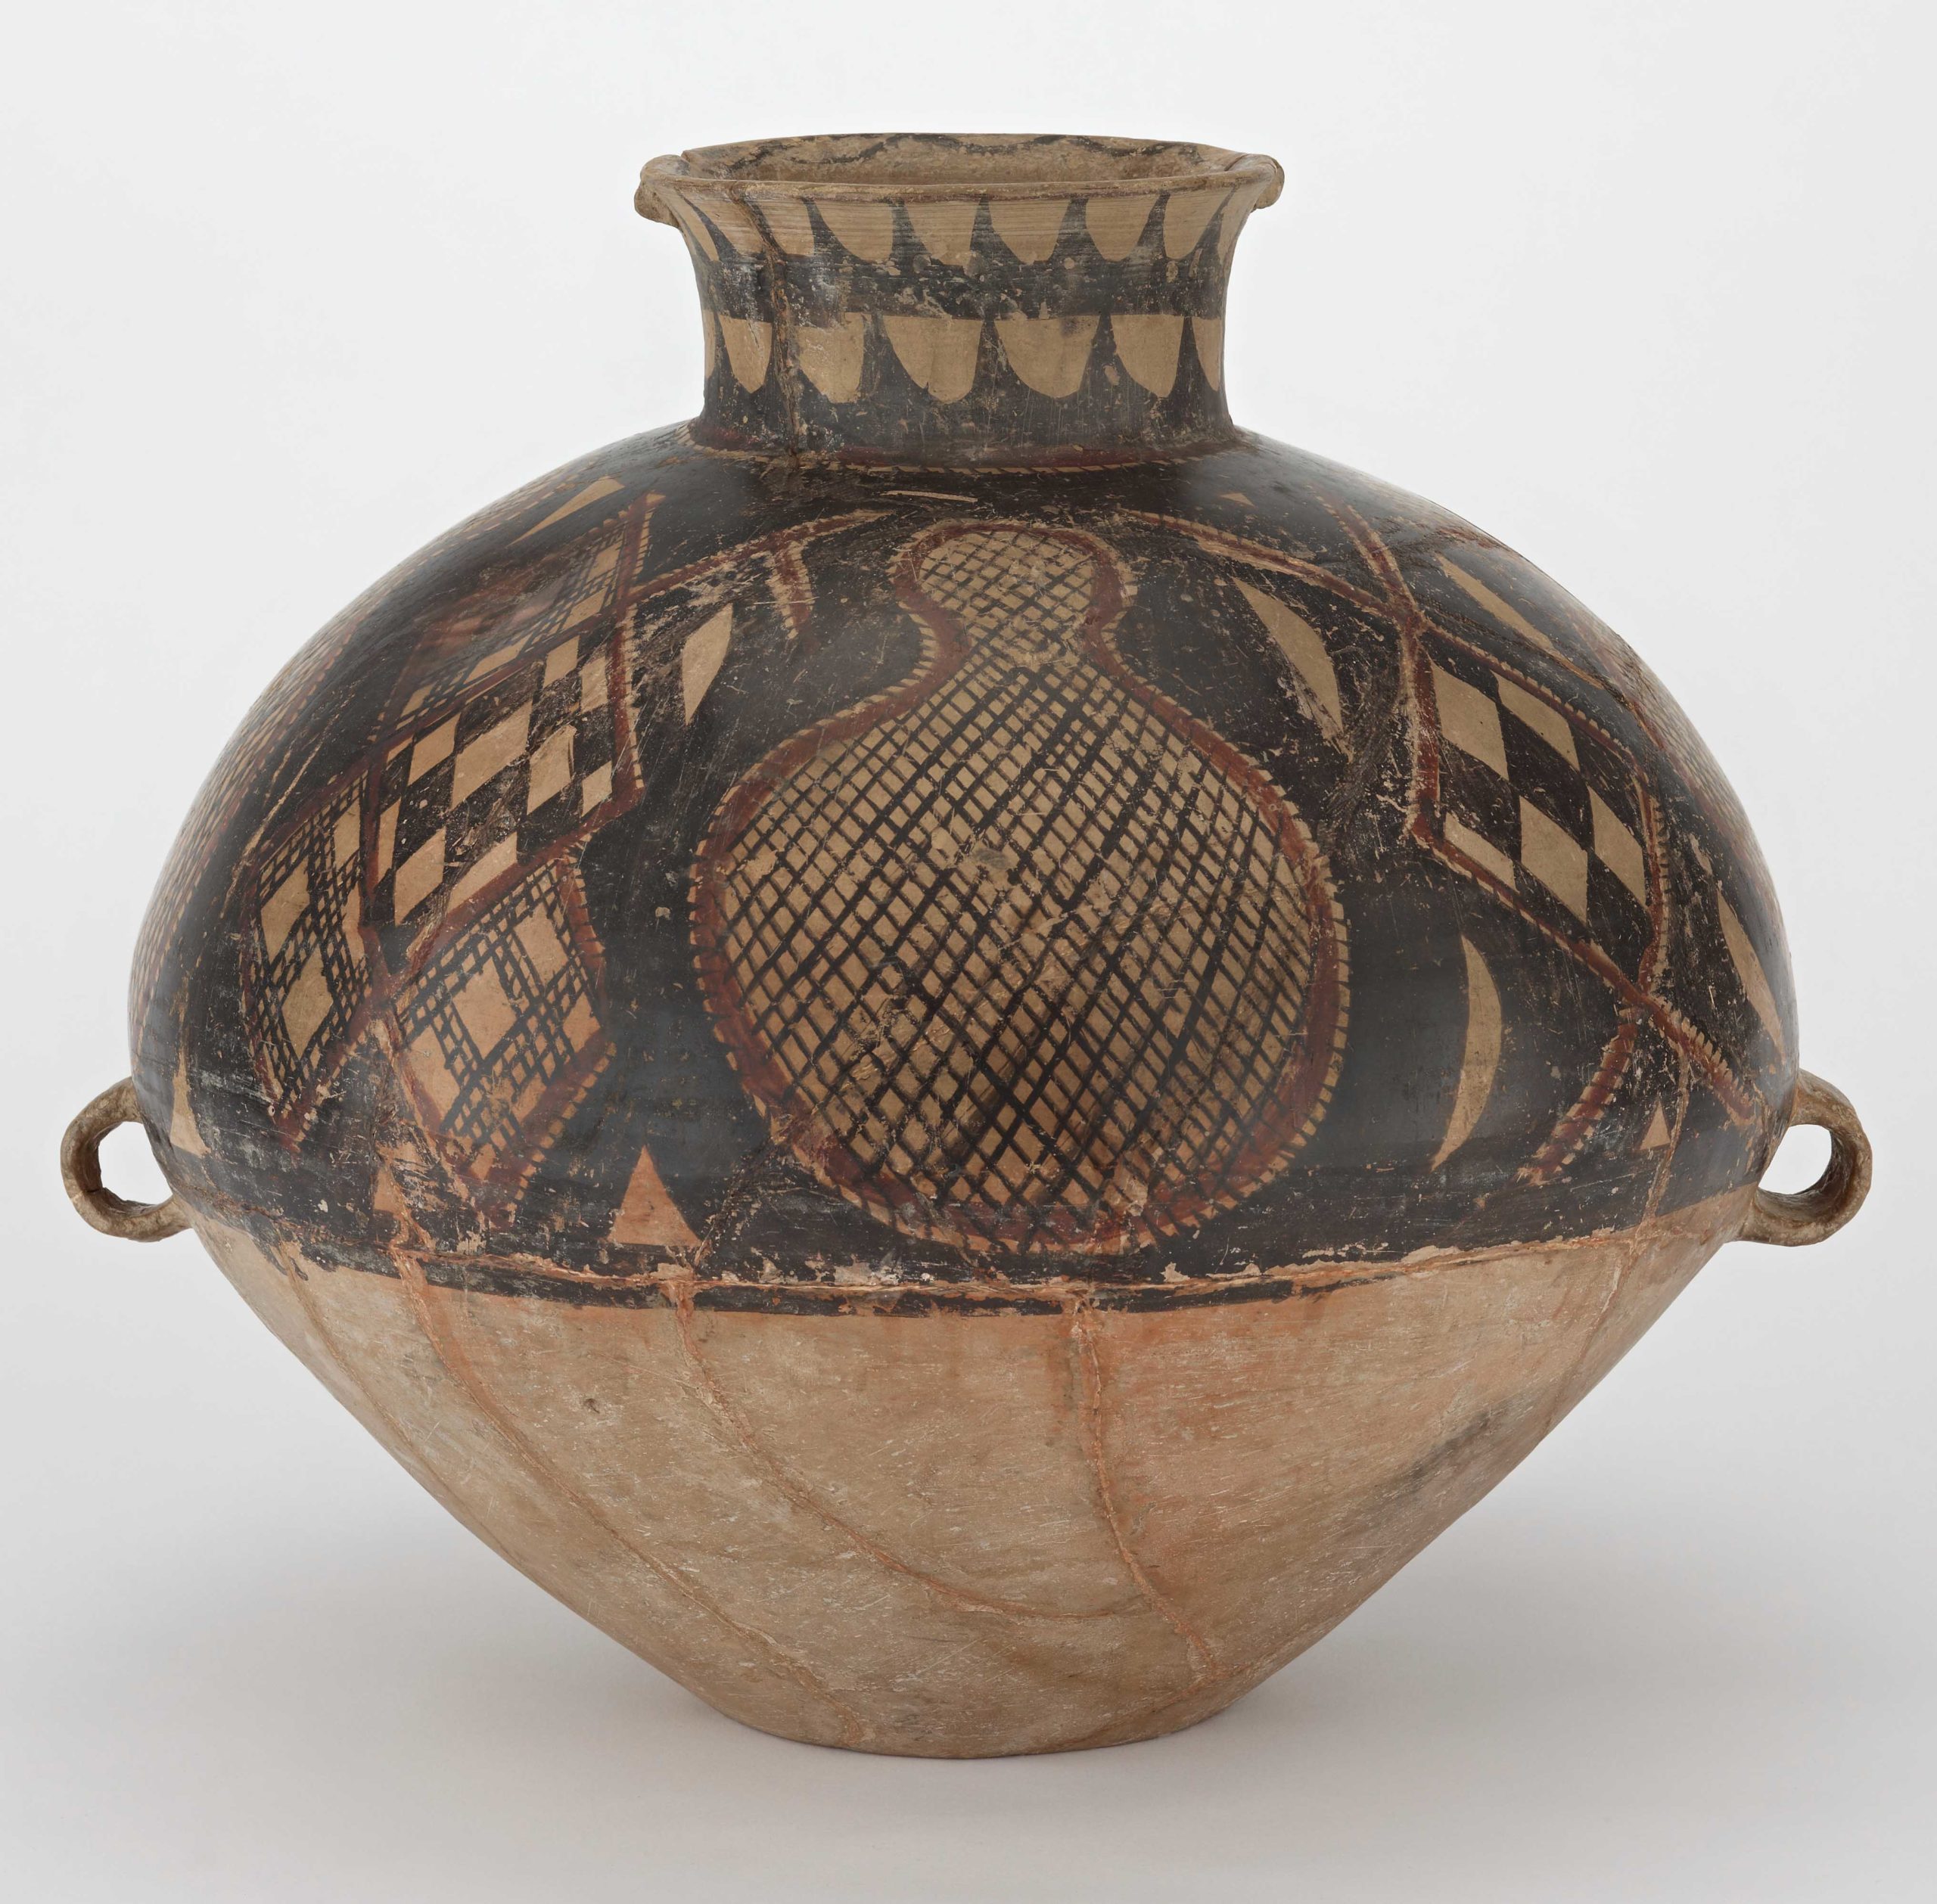 Banshan type jar, Gansu ware, Neolithic period, 5000-2000 BCE, Earthenware with iron pigments, China, 36.1 x 42.3 cm